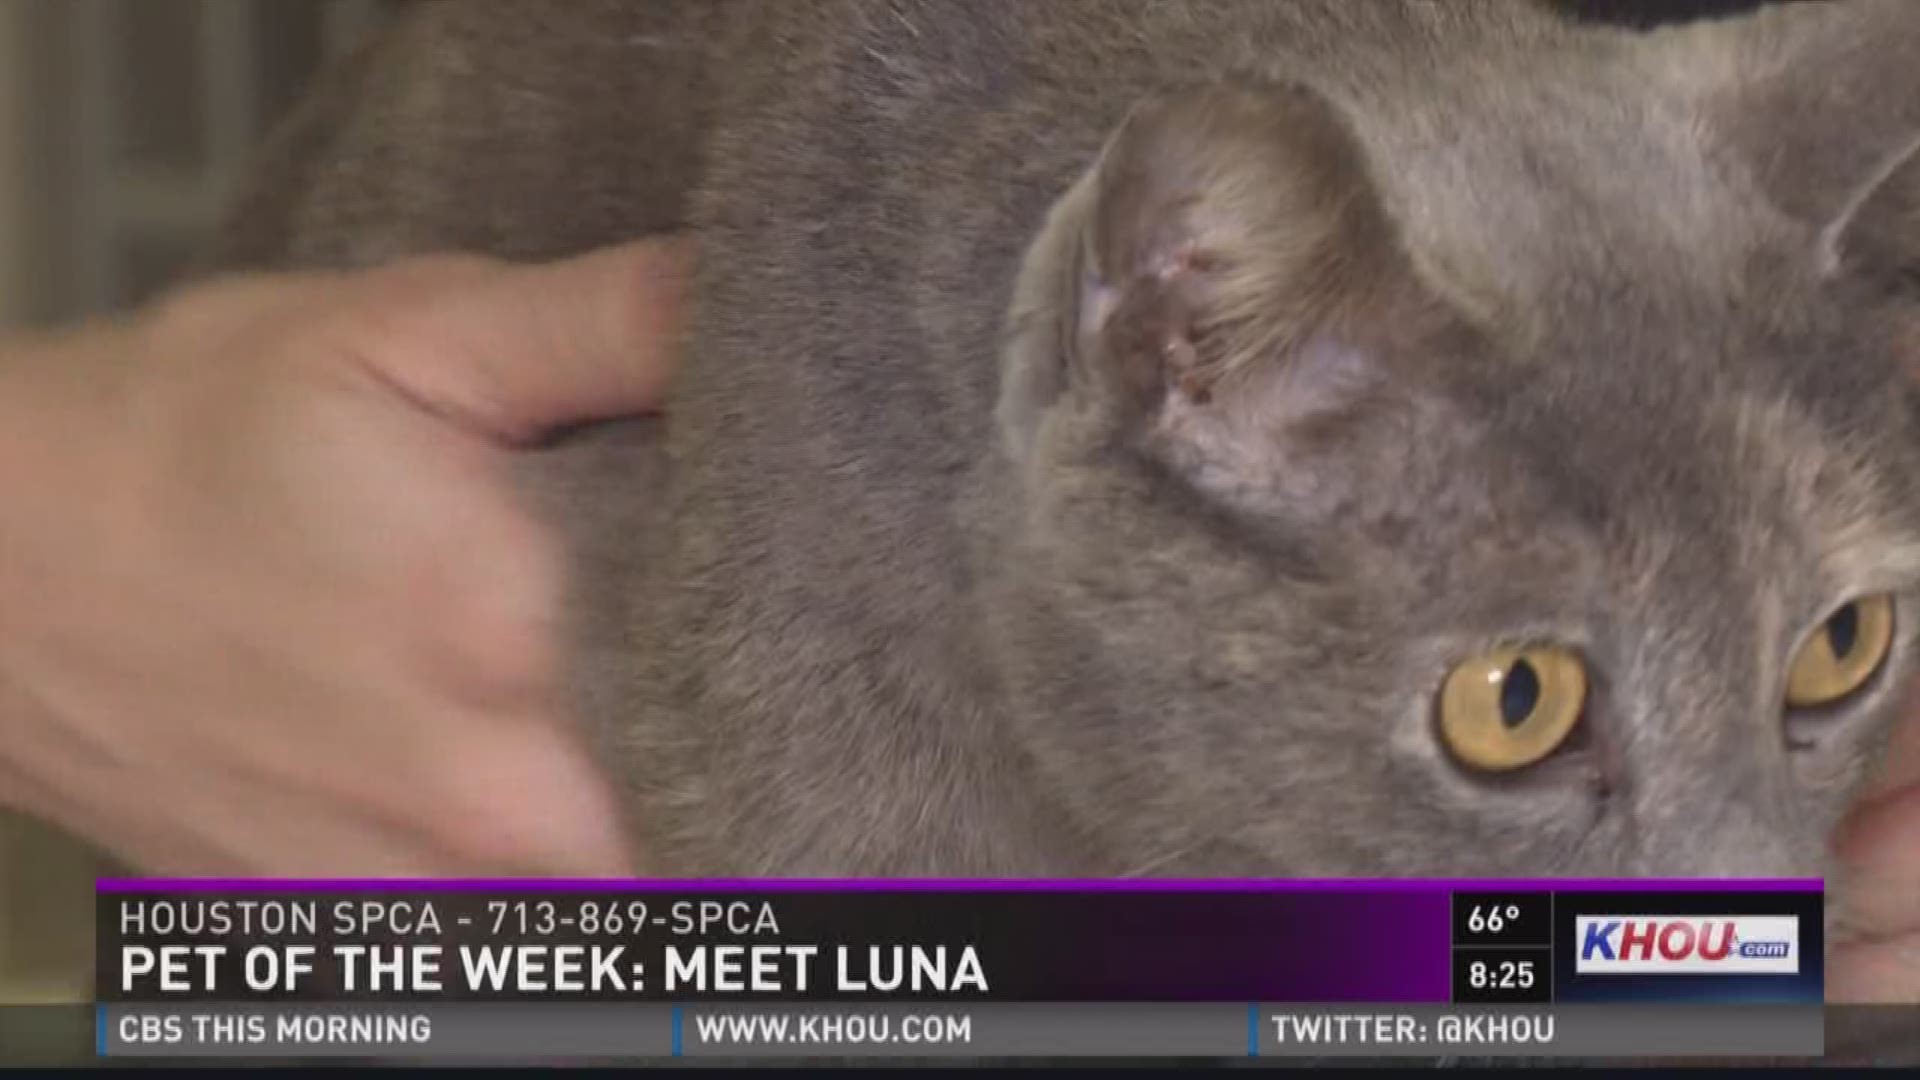 KHOU 11 Anchor Russ Lewis and the Houston SPCA introduce us to Luna who is up for adoption.